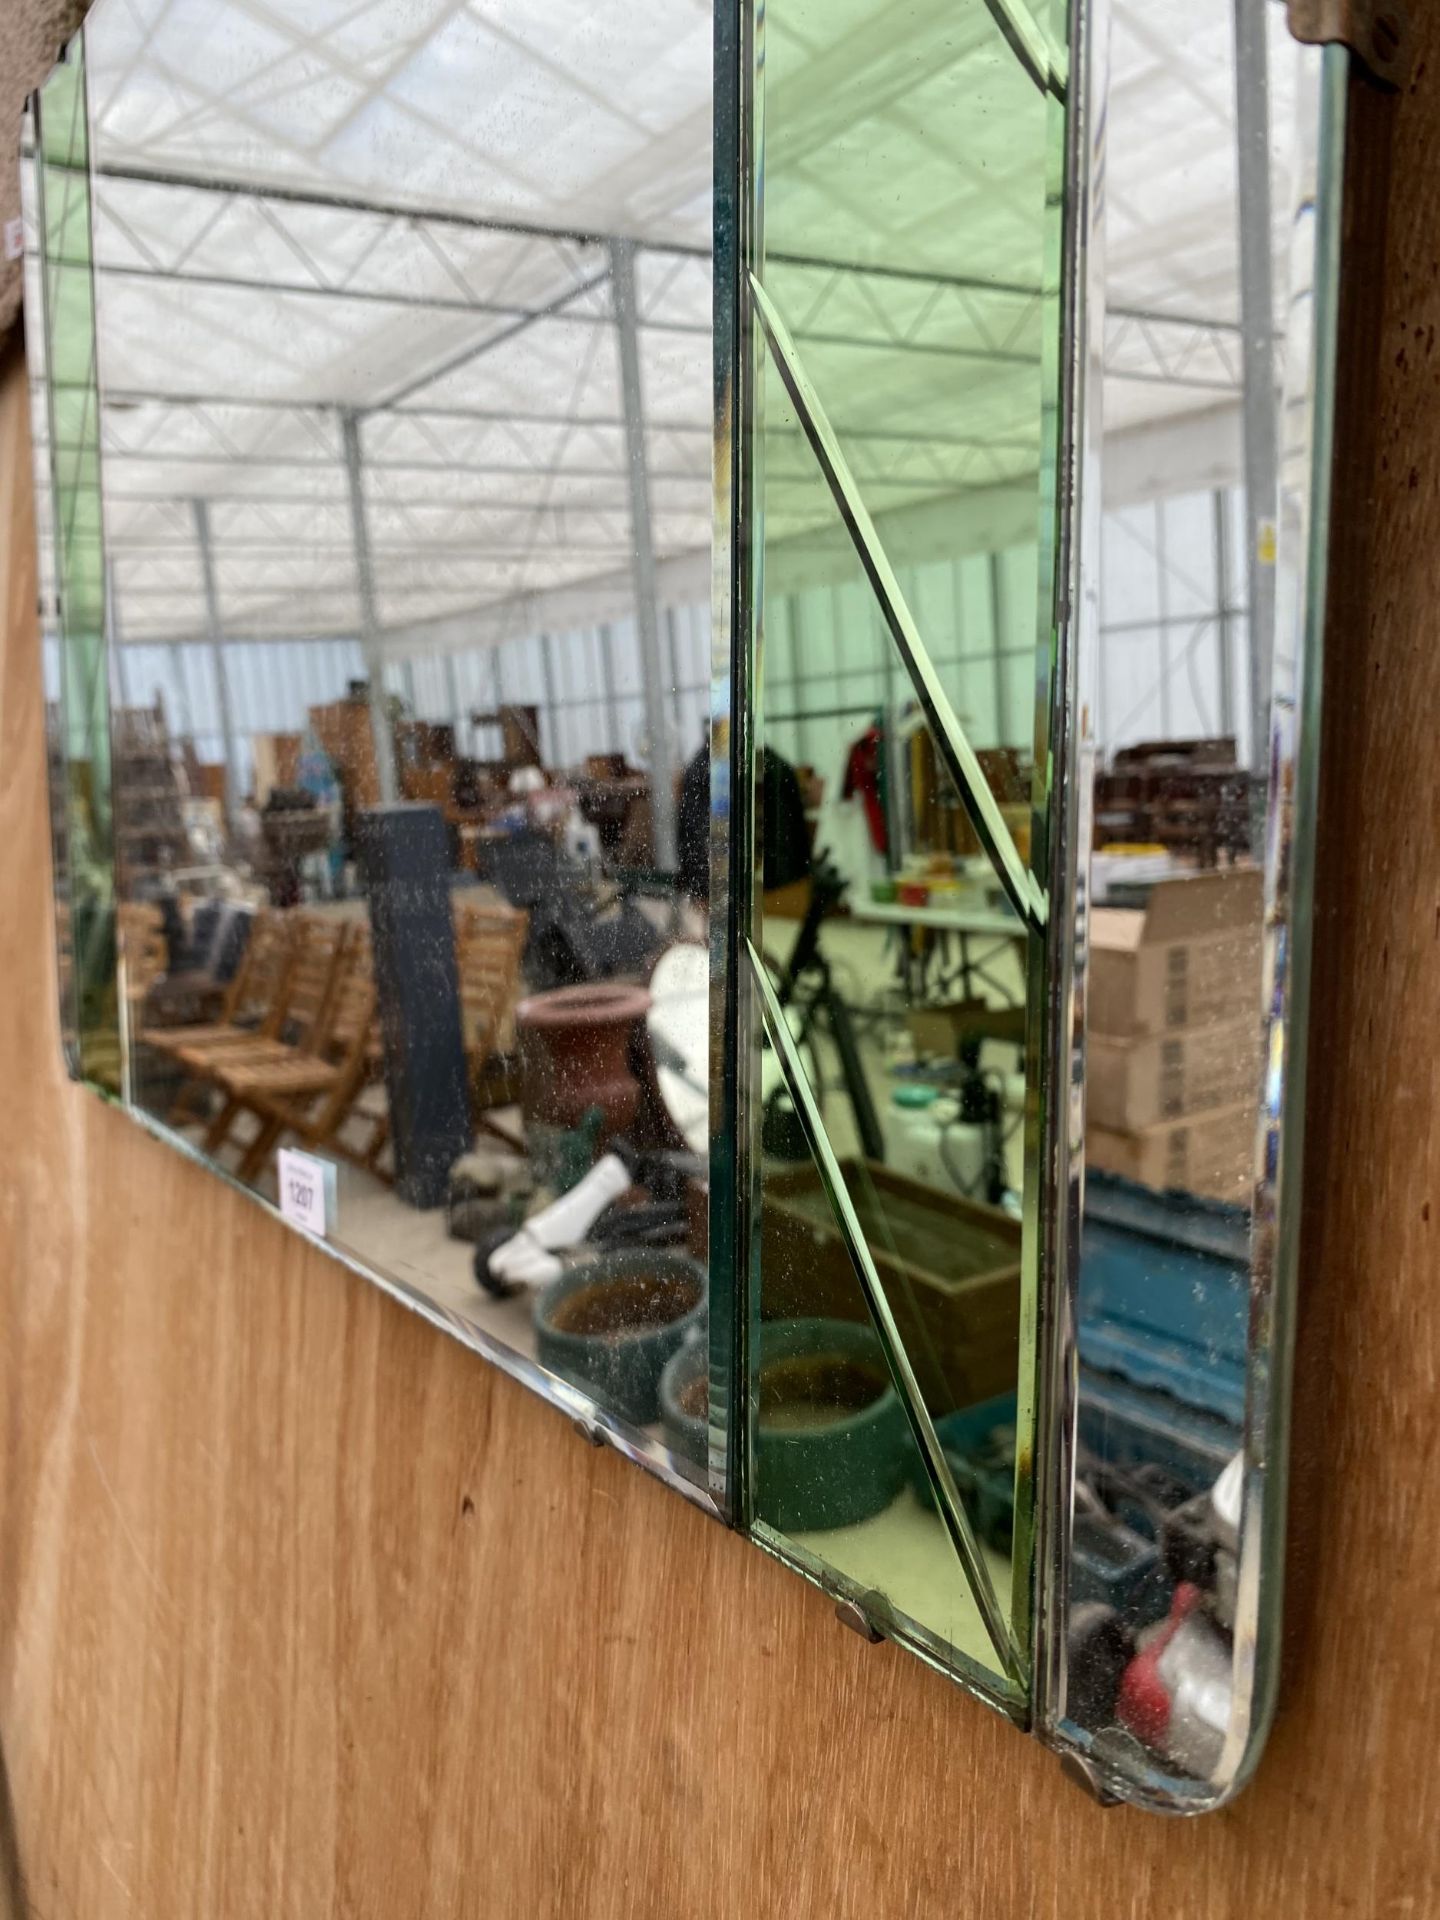 AN ART DECO BEVELED EDGE WALL MIRROR WITH GREEN GLASS DETAIL - Image 4 of 4